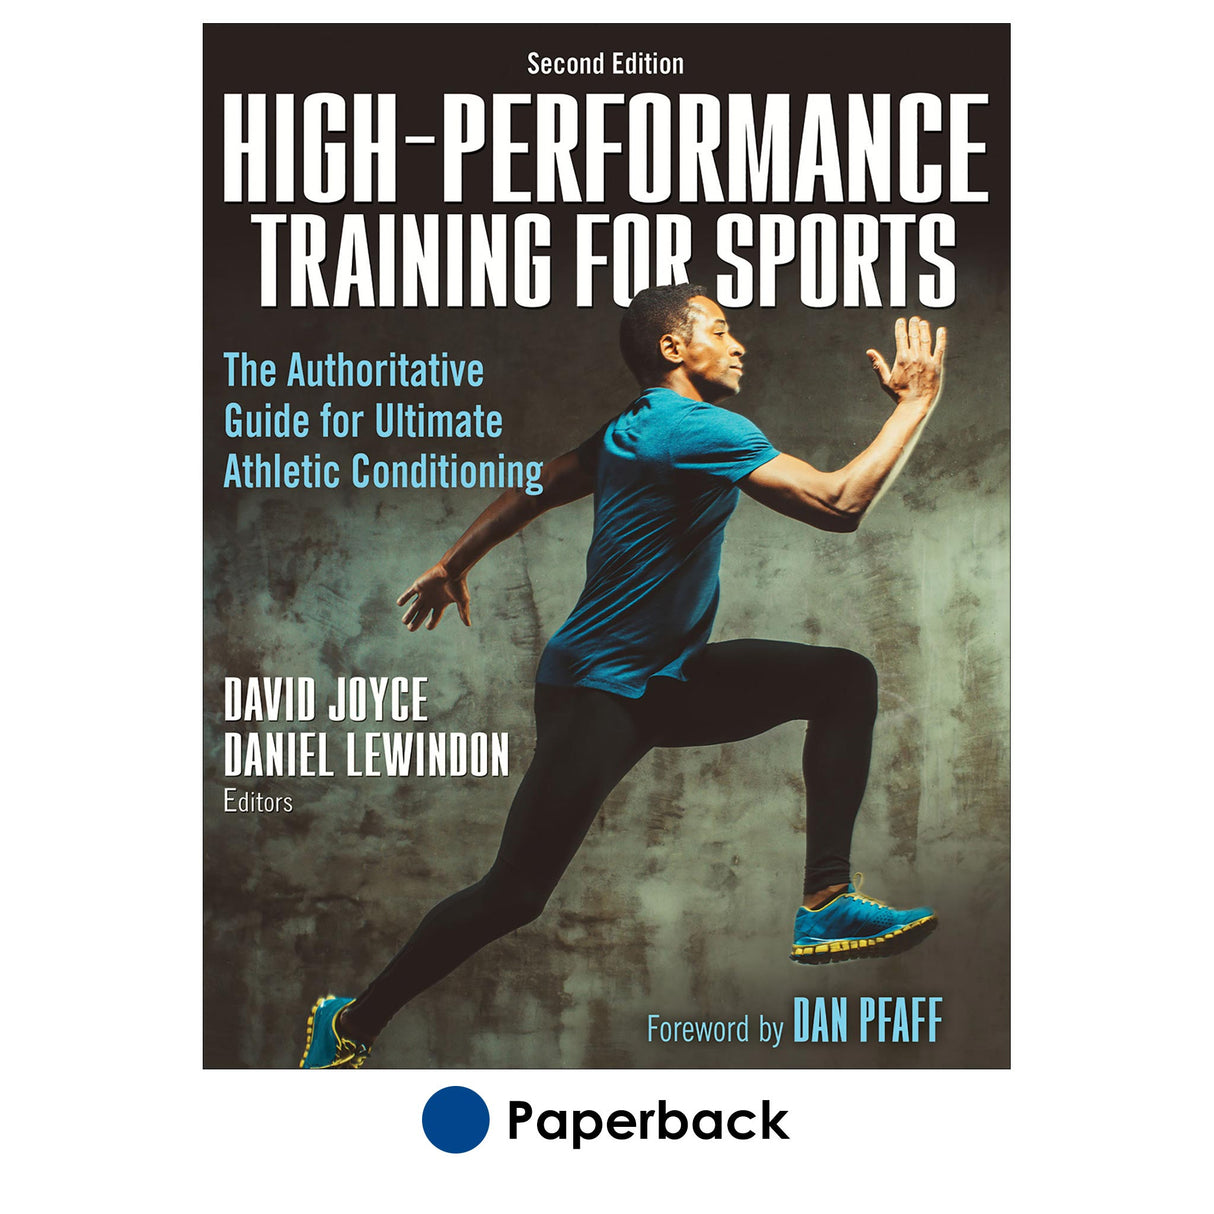 High-Performance Training for Sports-2nd Edition